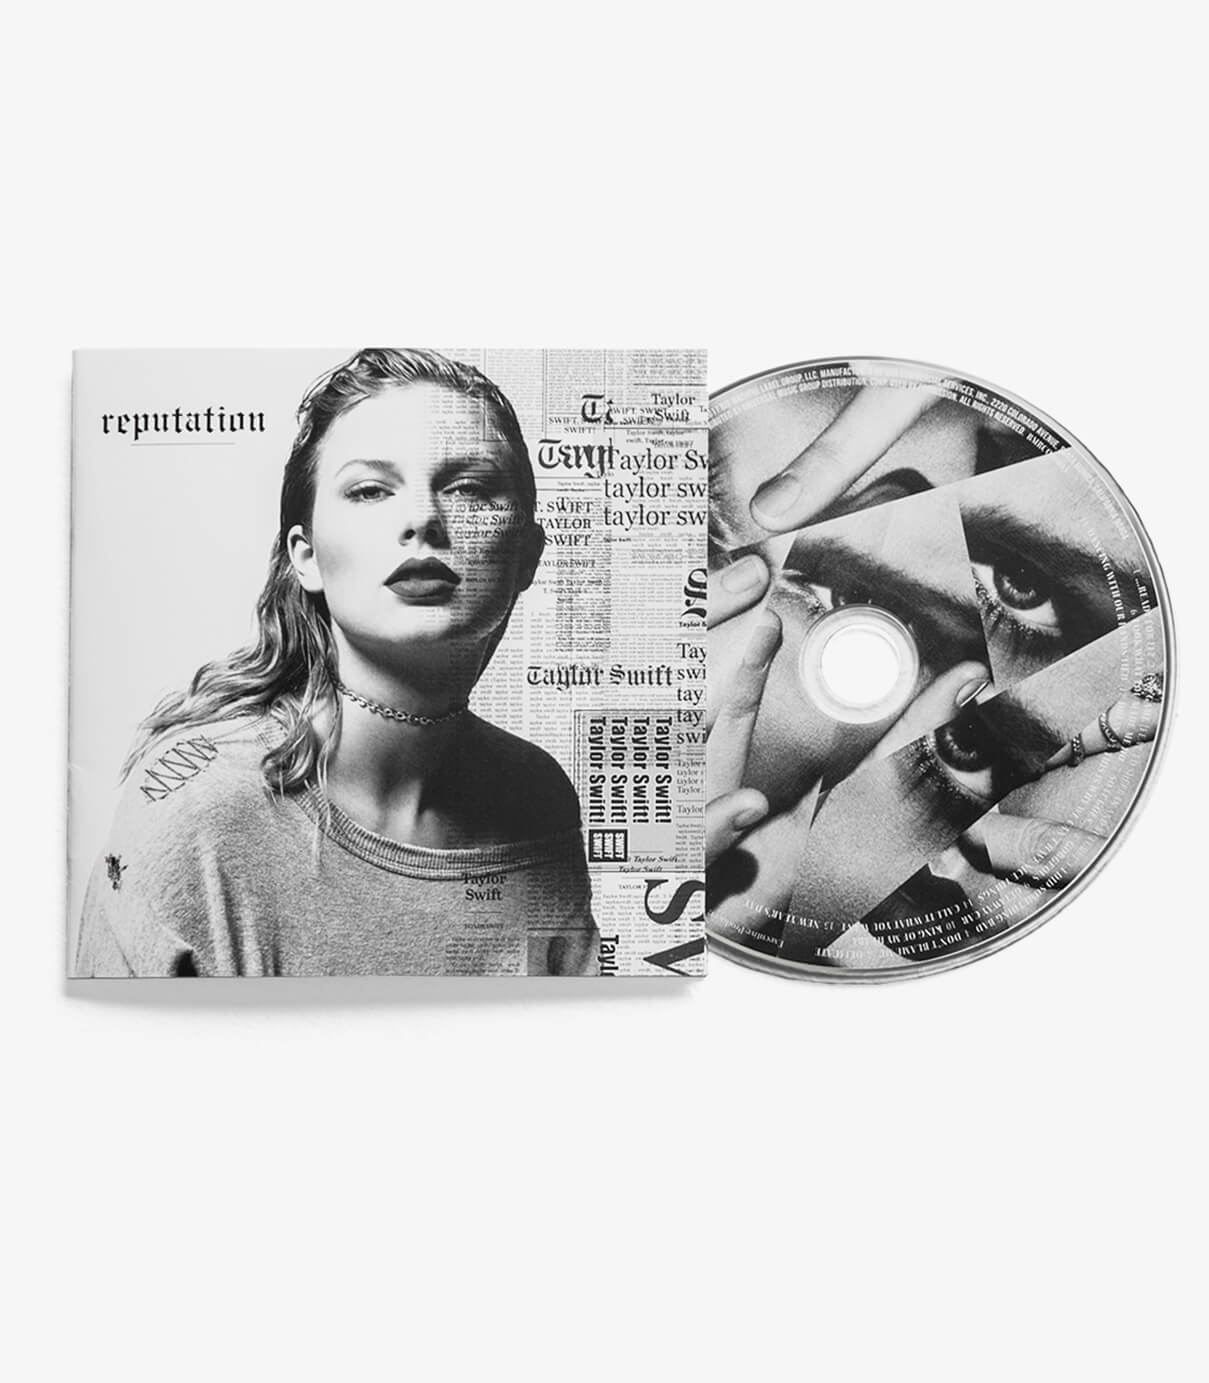 packaging design of reputation cd cover and disk